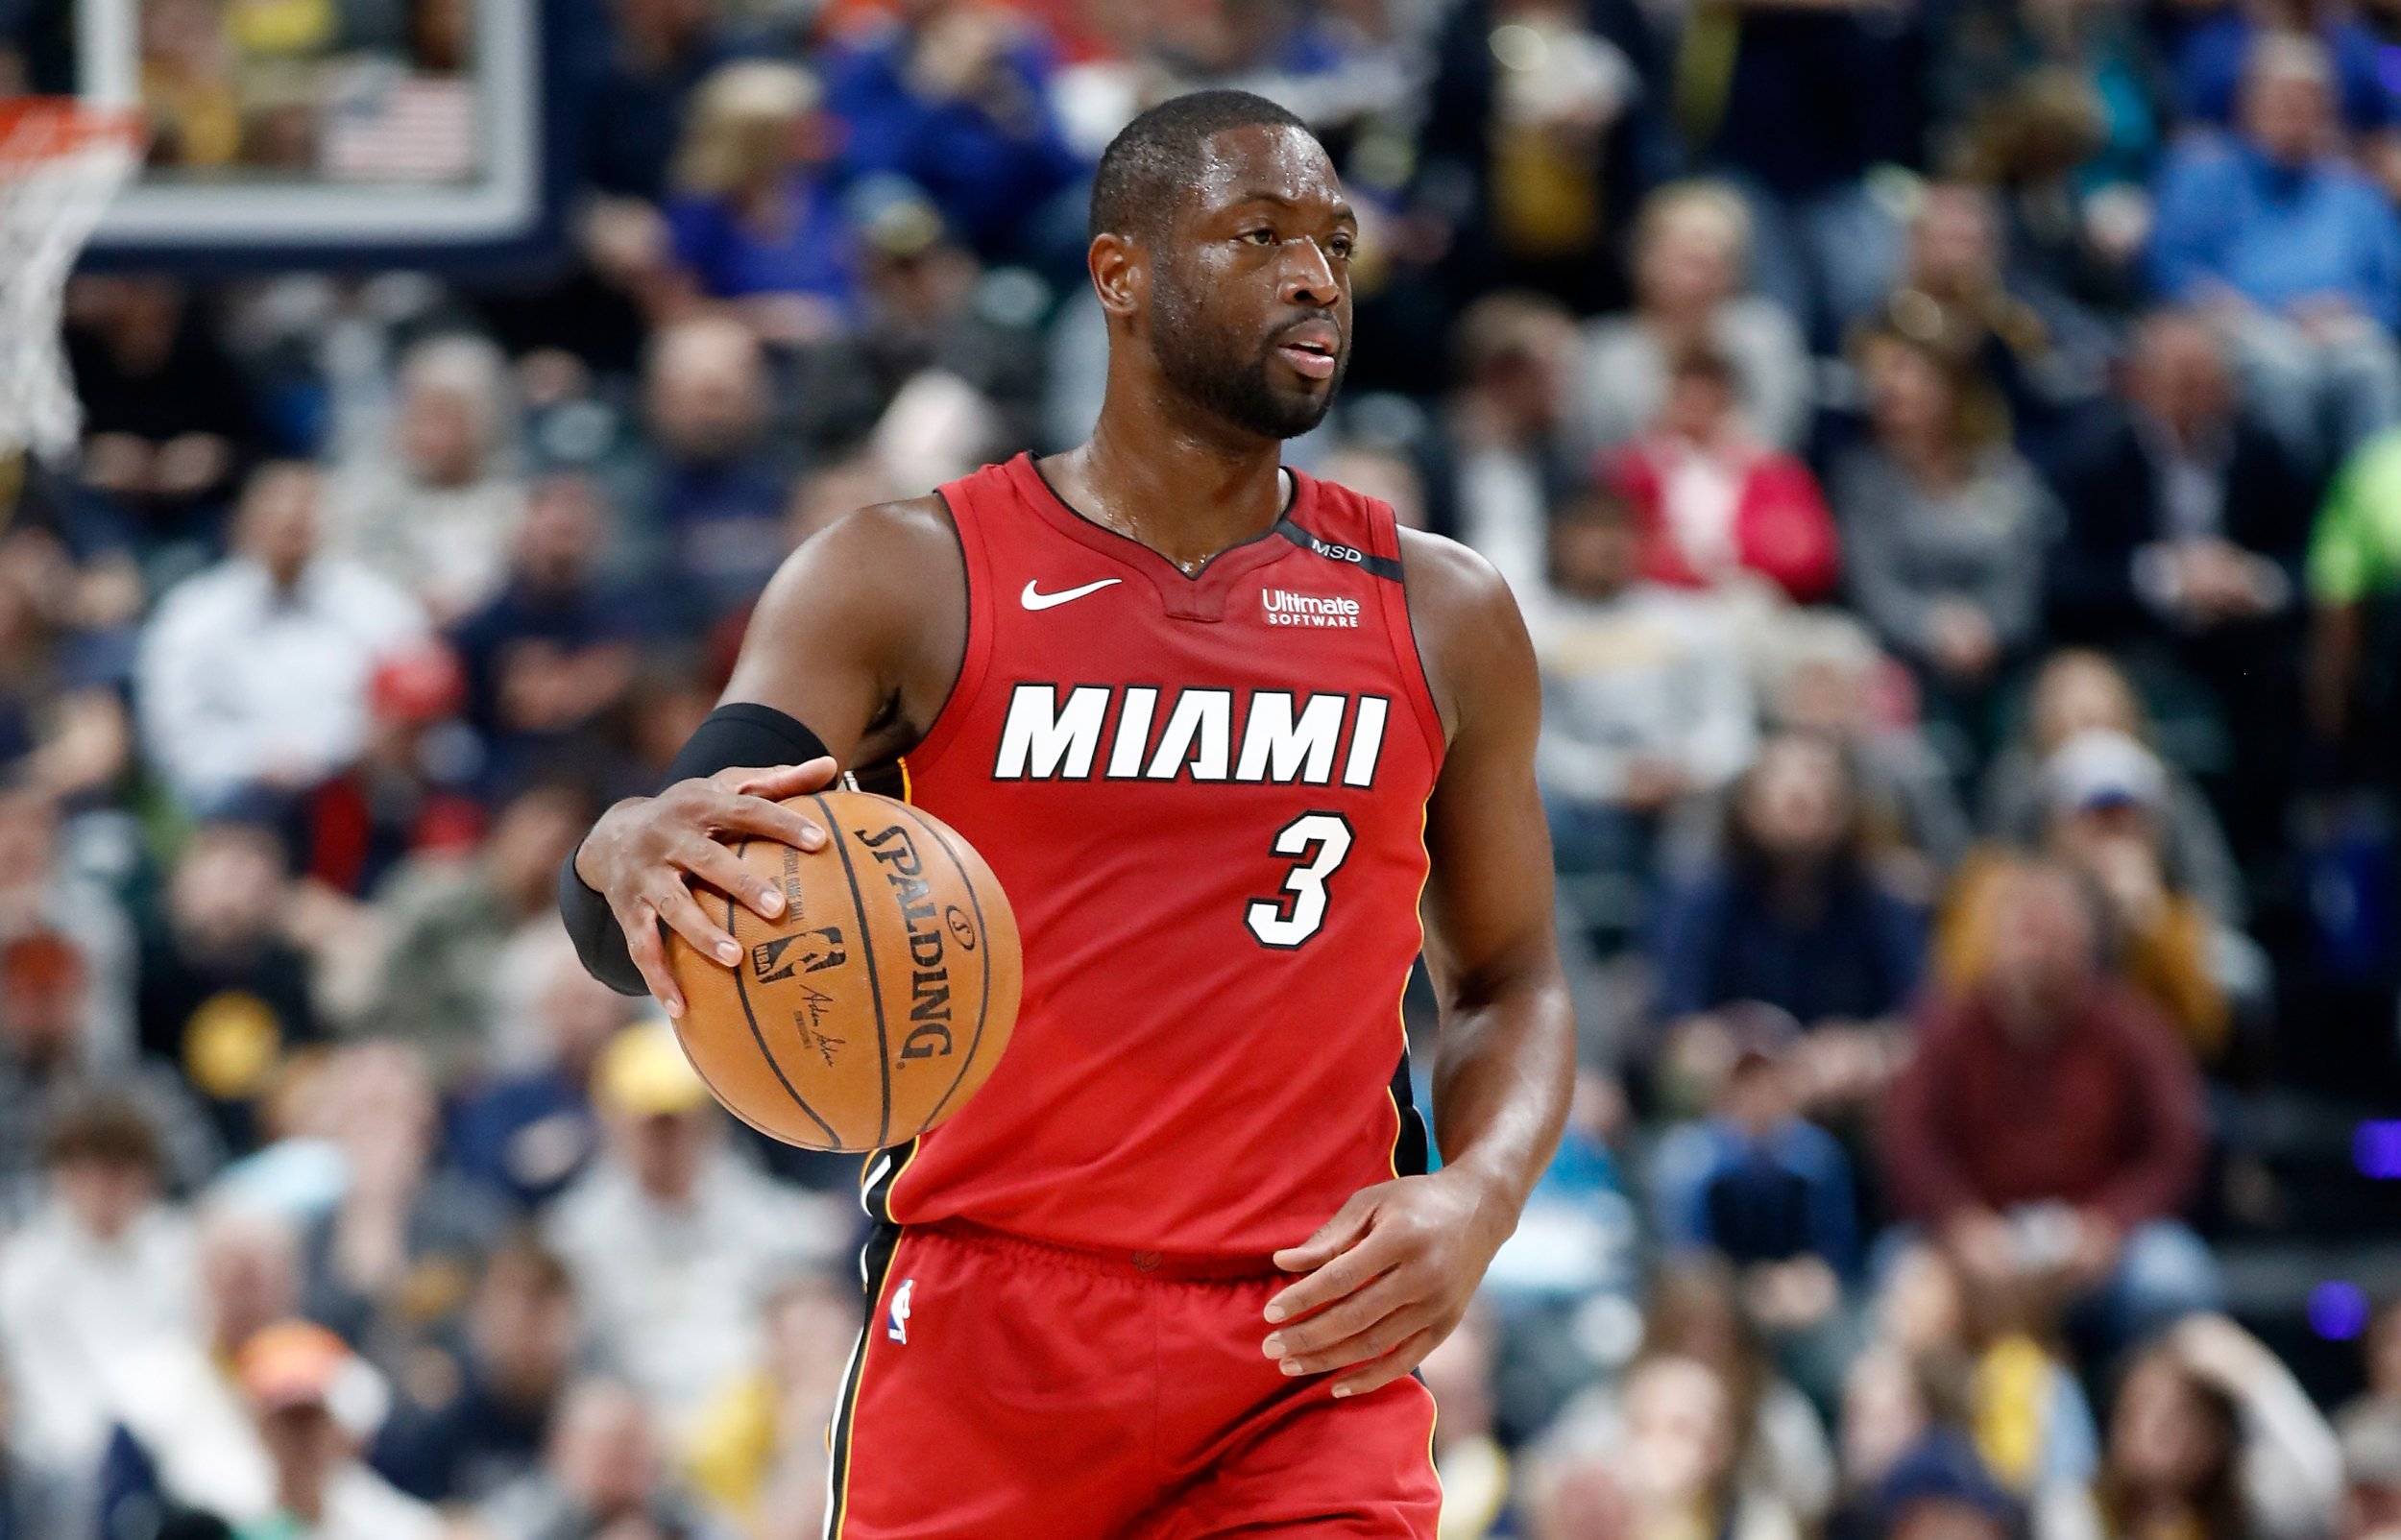 Who is Dwyane Wade’s agent?